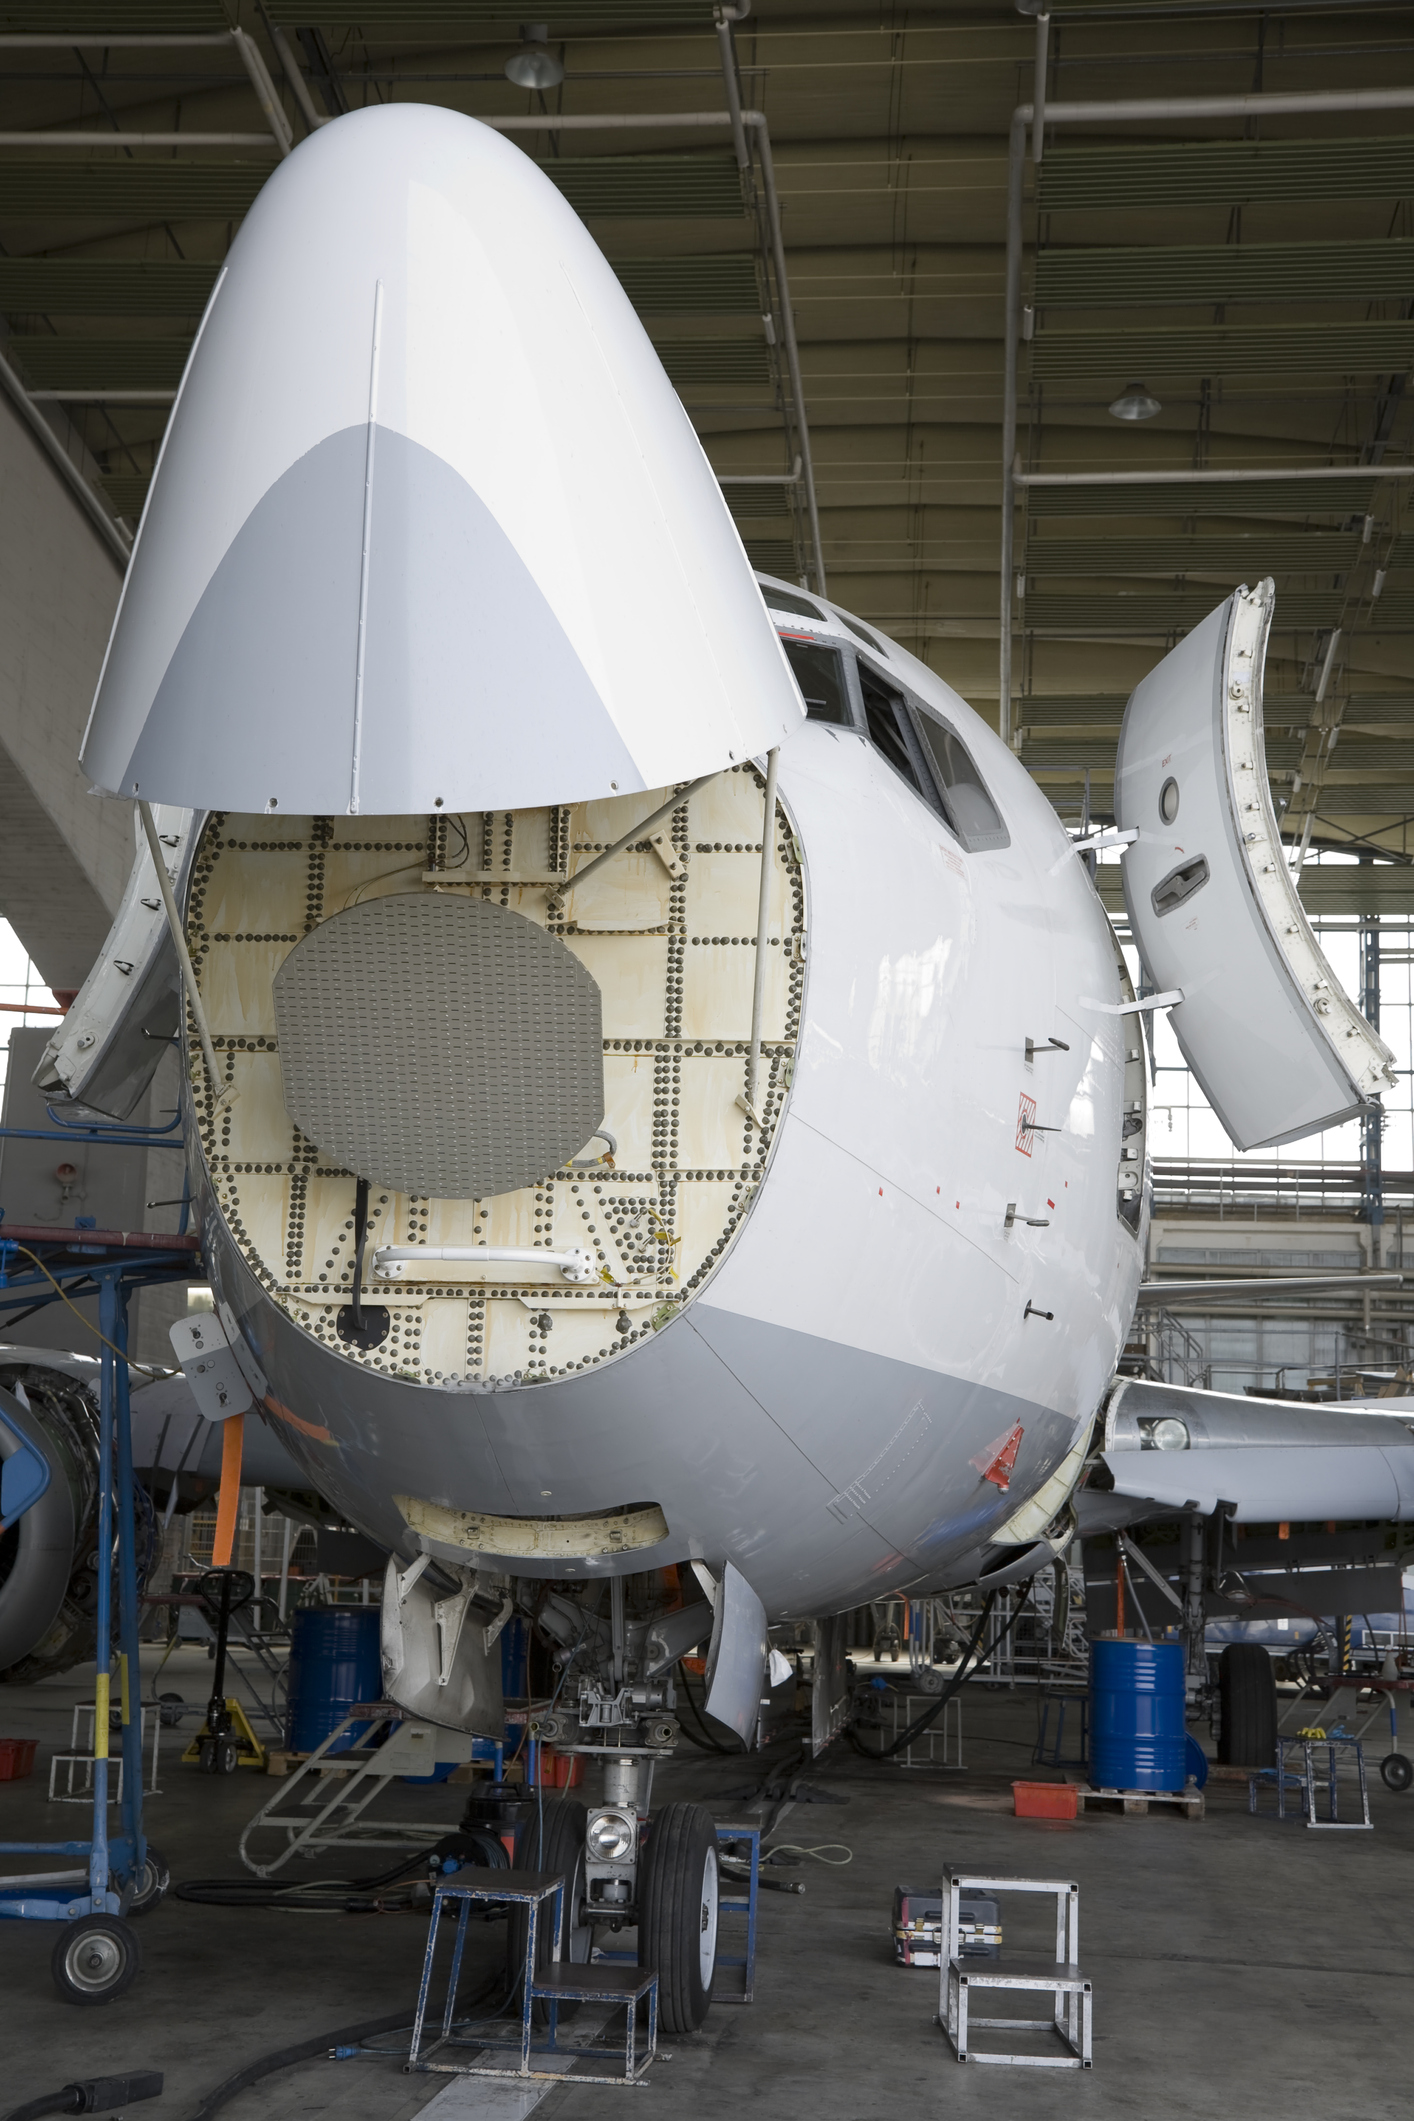 Commercial Airplane Maintenance Check in Hangar